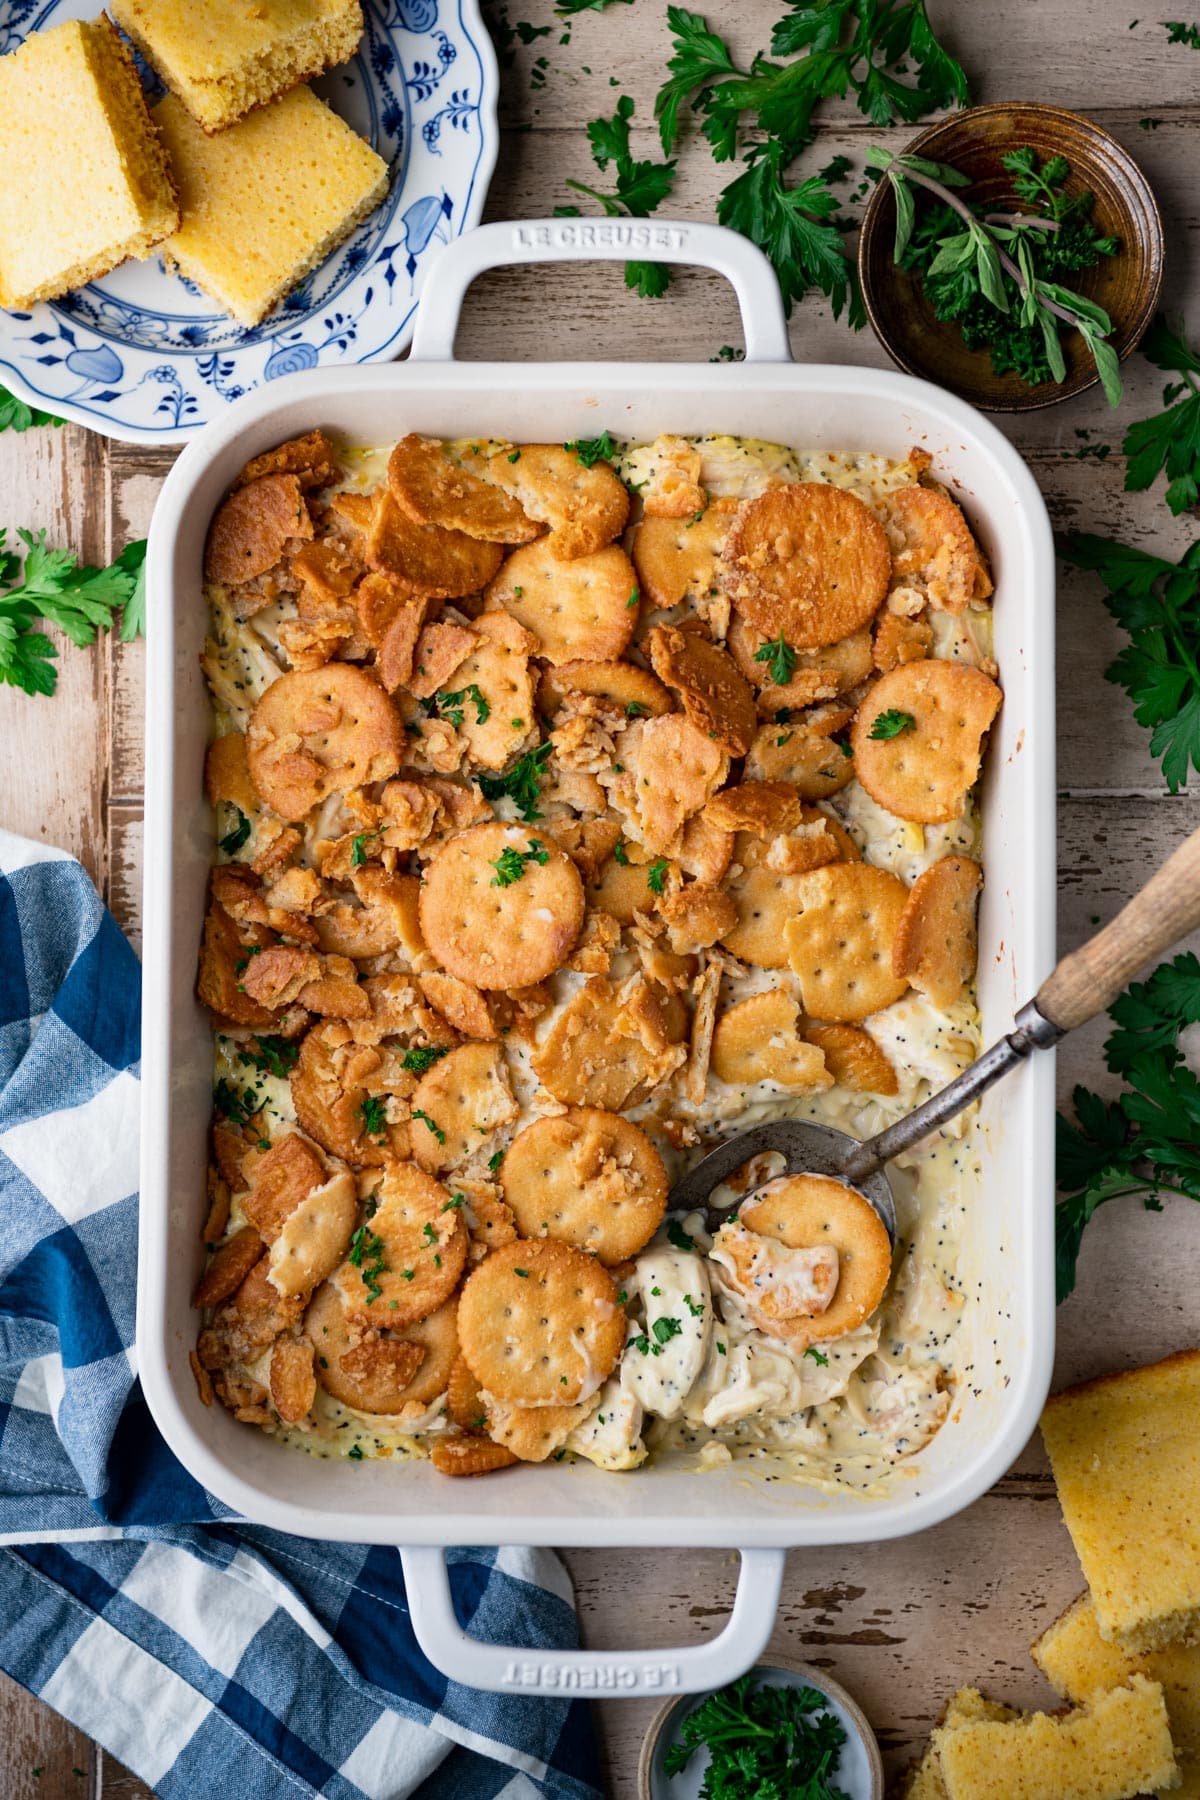 Chicken poppy seed casserole recipe in a white dish on a wooden table.